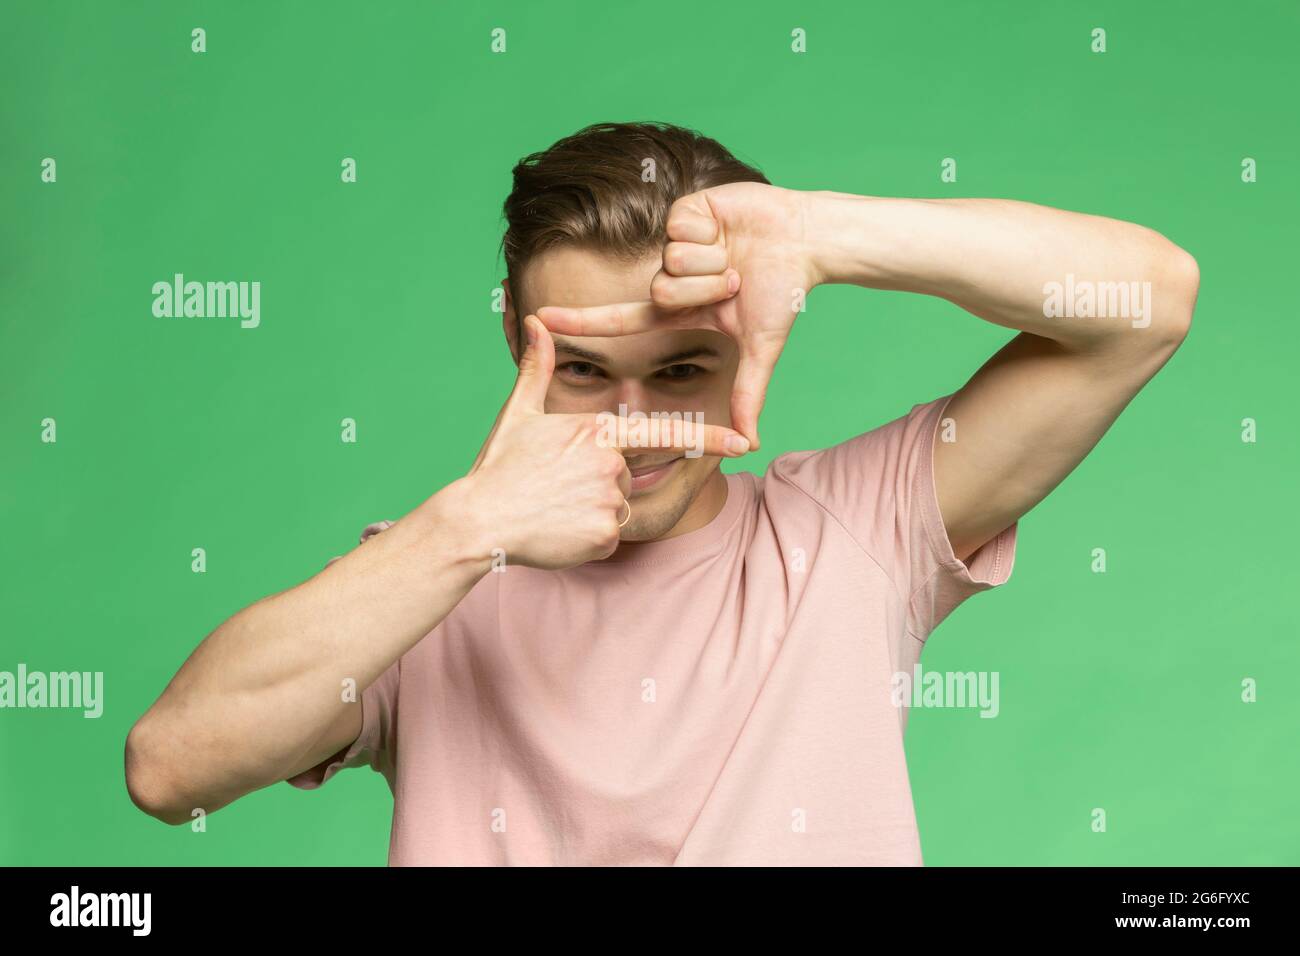 Studio portrait young man gesturing finger frame on green background Stock Photo